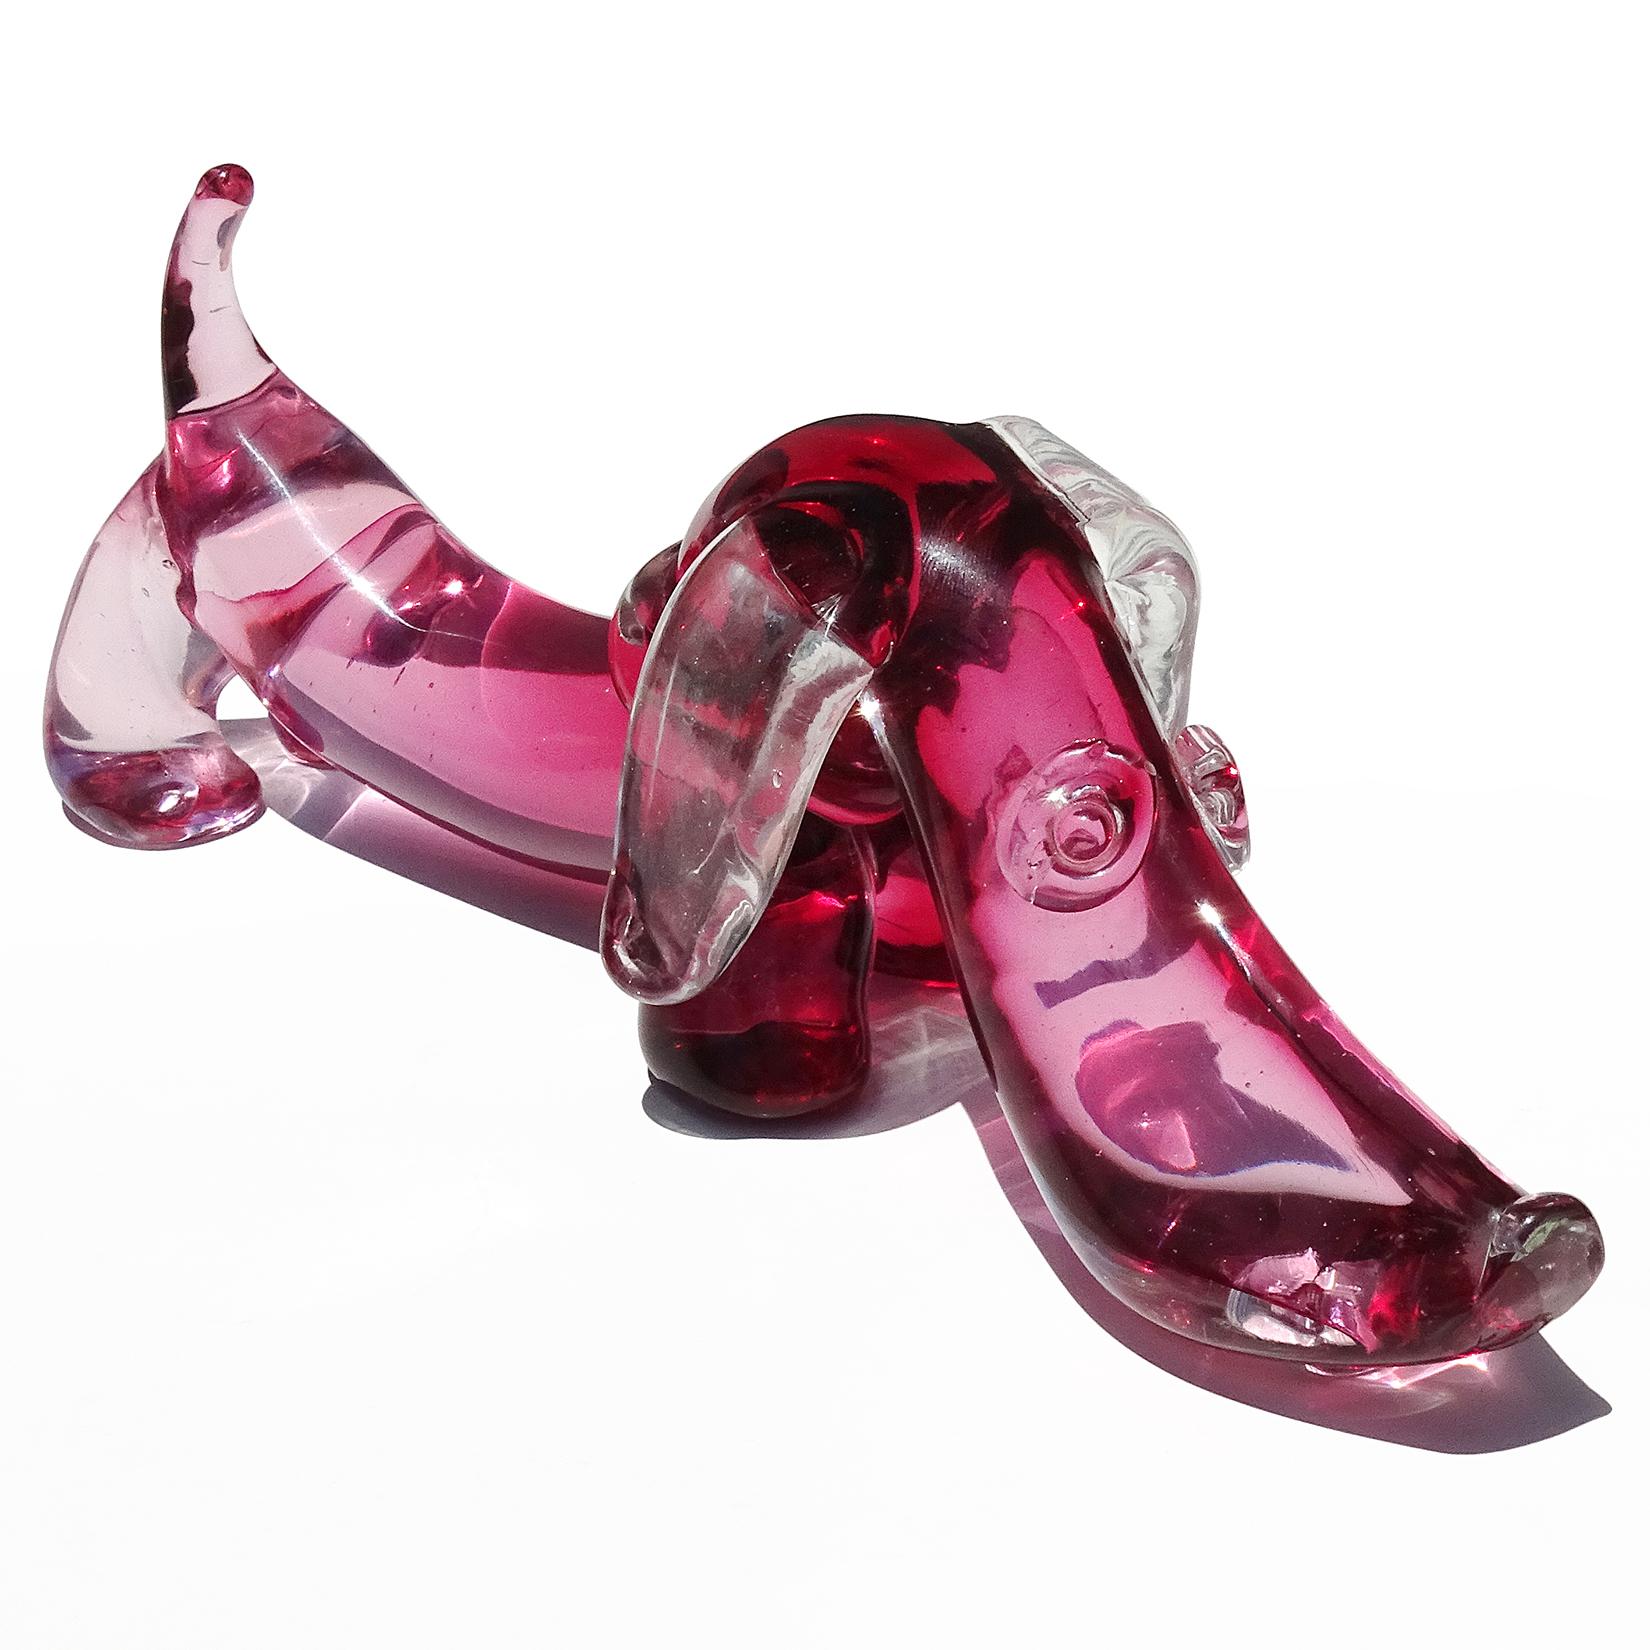 Hand-Crafted Seguso Murano Sommerso Pink Italian Art Glass Dachshund Puppy Dog Sculpture